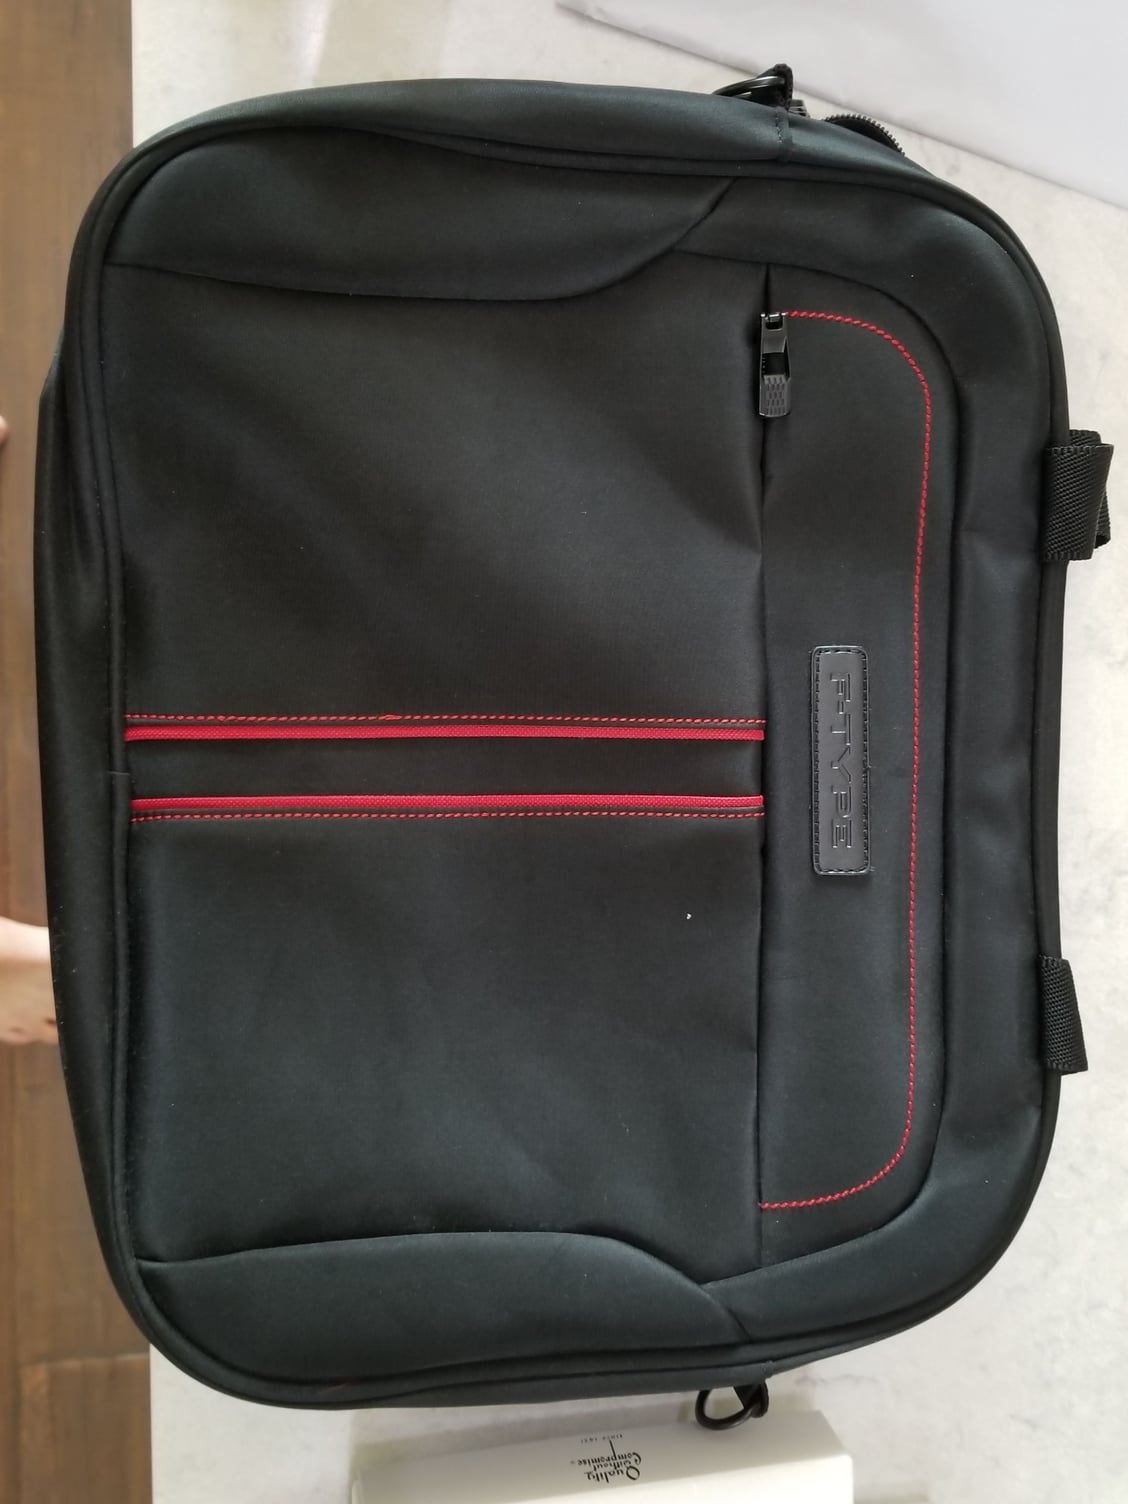 Did Anyone Buy The 5-Piece F-Type Luggage Yet? - Page 3 - Jaguar Forums ...